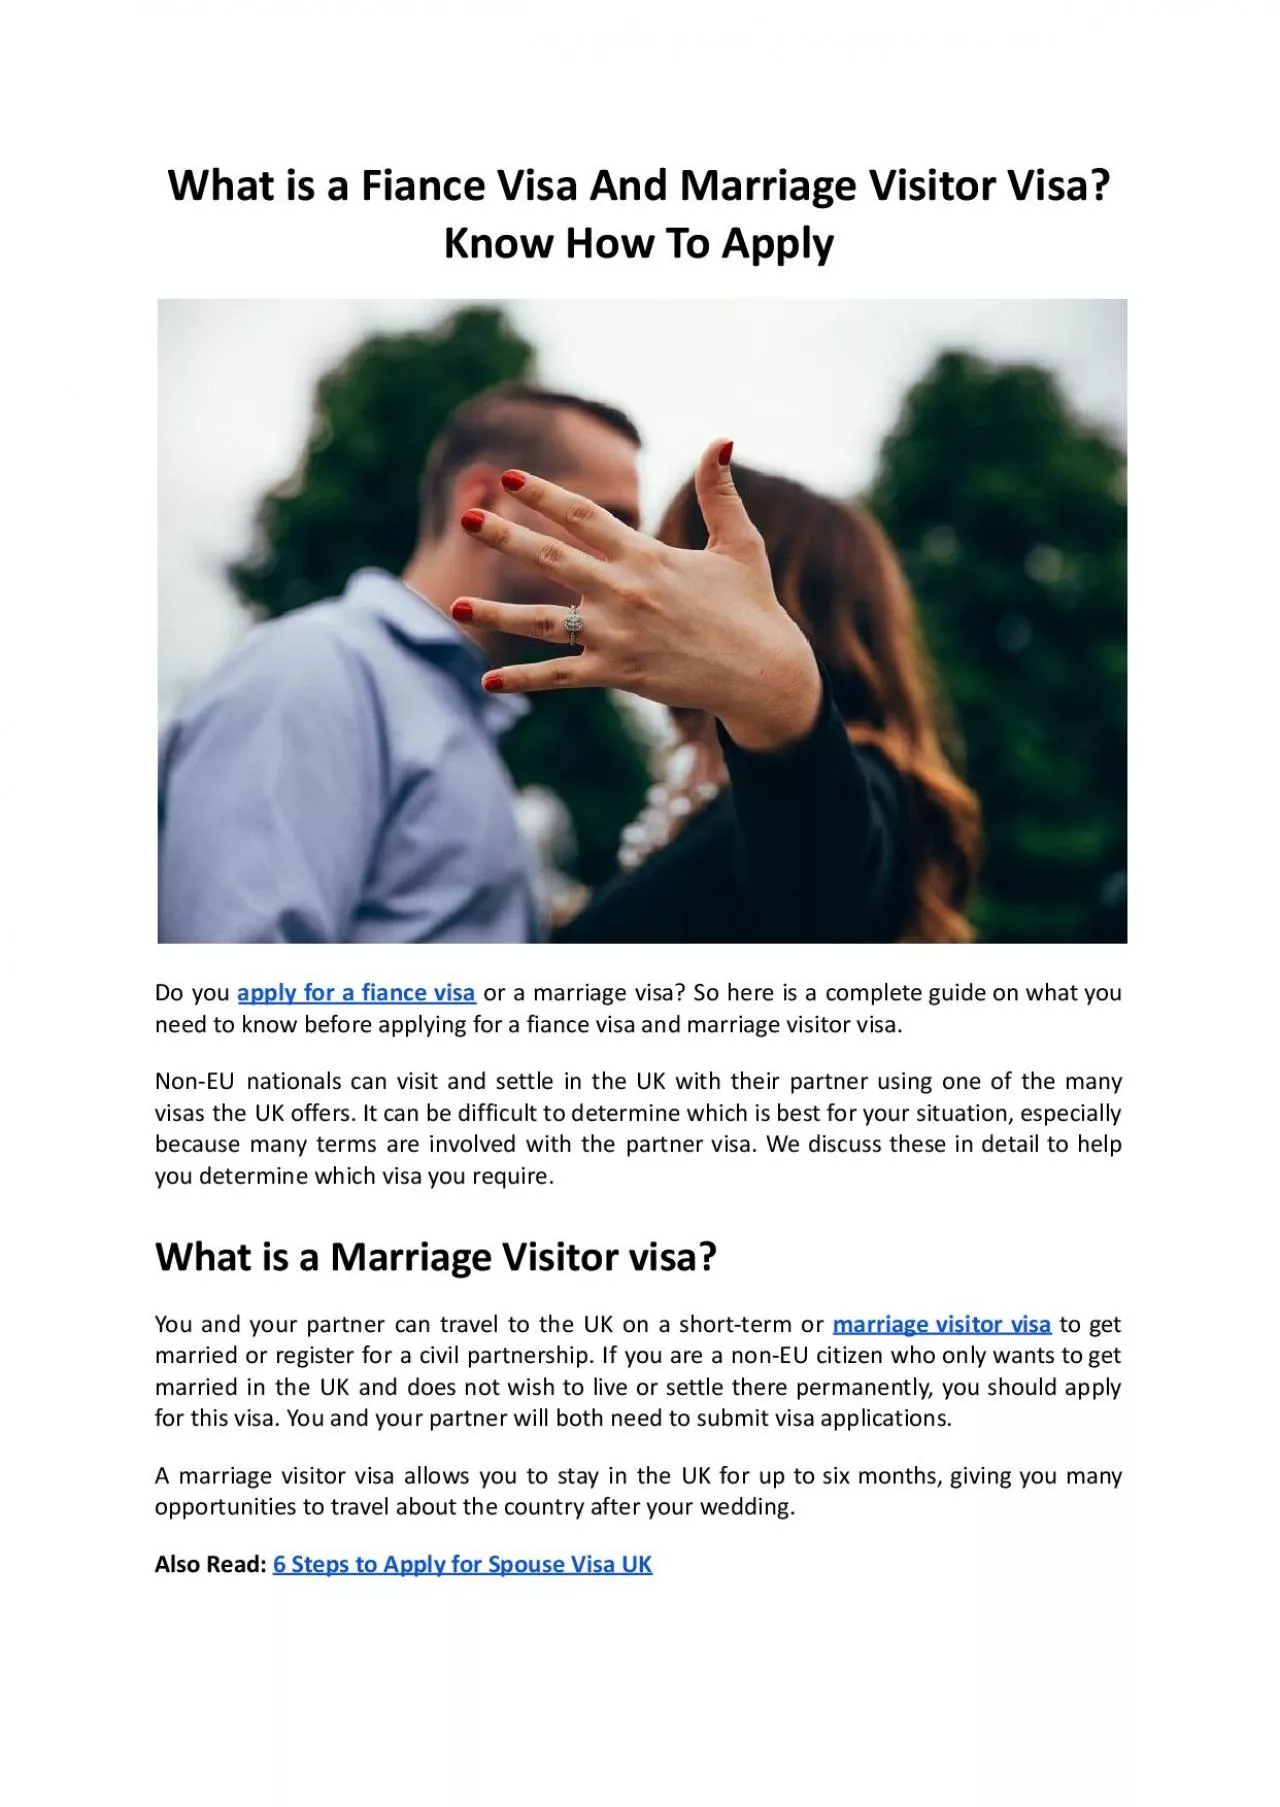 What is a Fiance Visa And Marriage Visitor Visa - My Legal Services